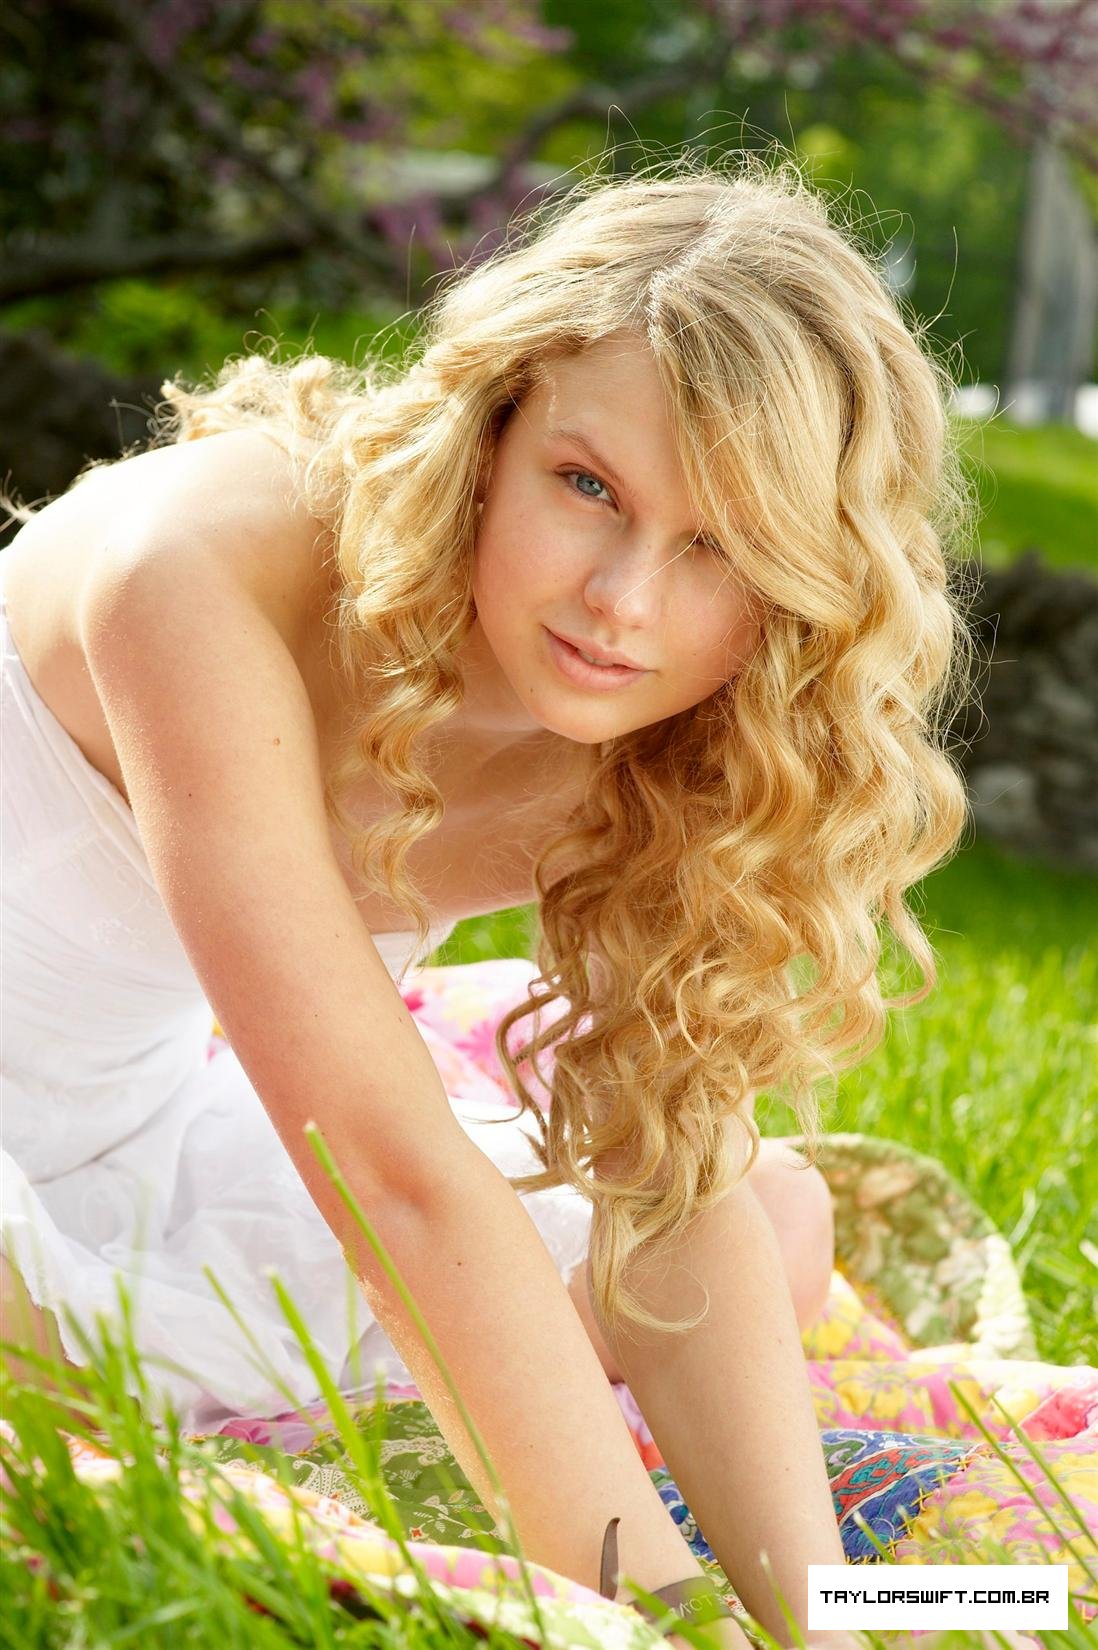 Taylor Swift with no makeup picture 5 of 12